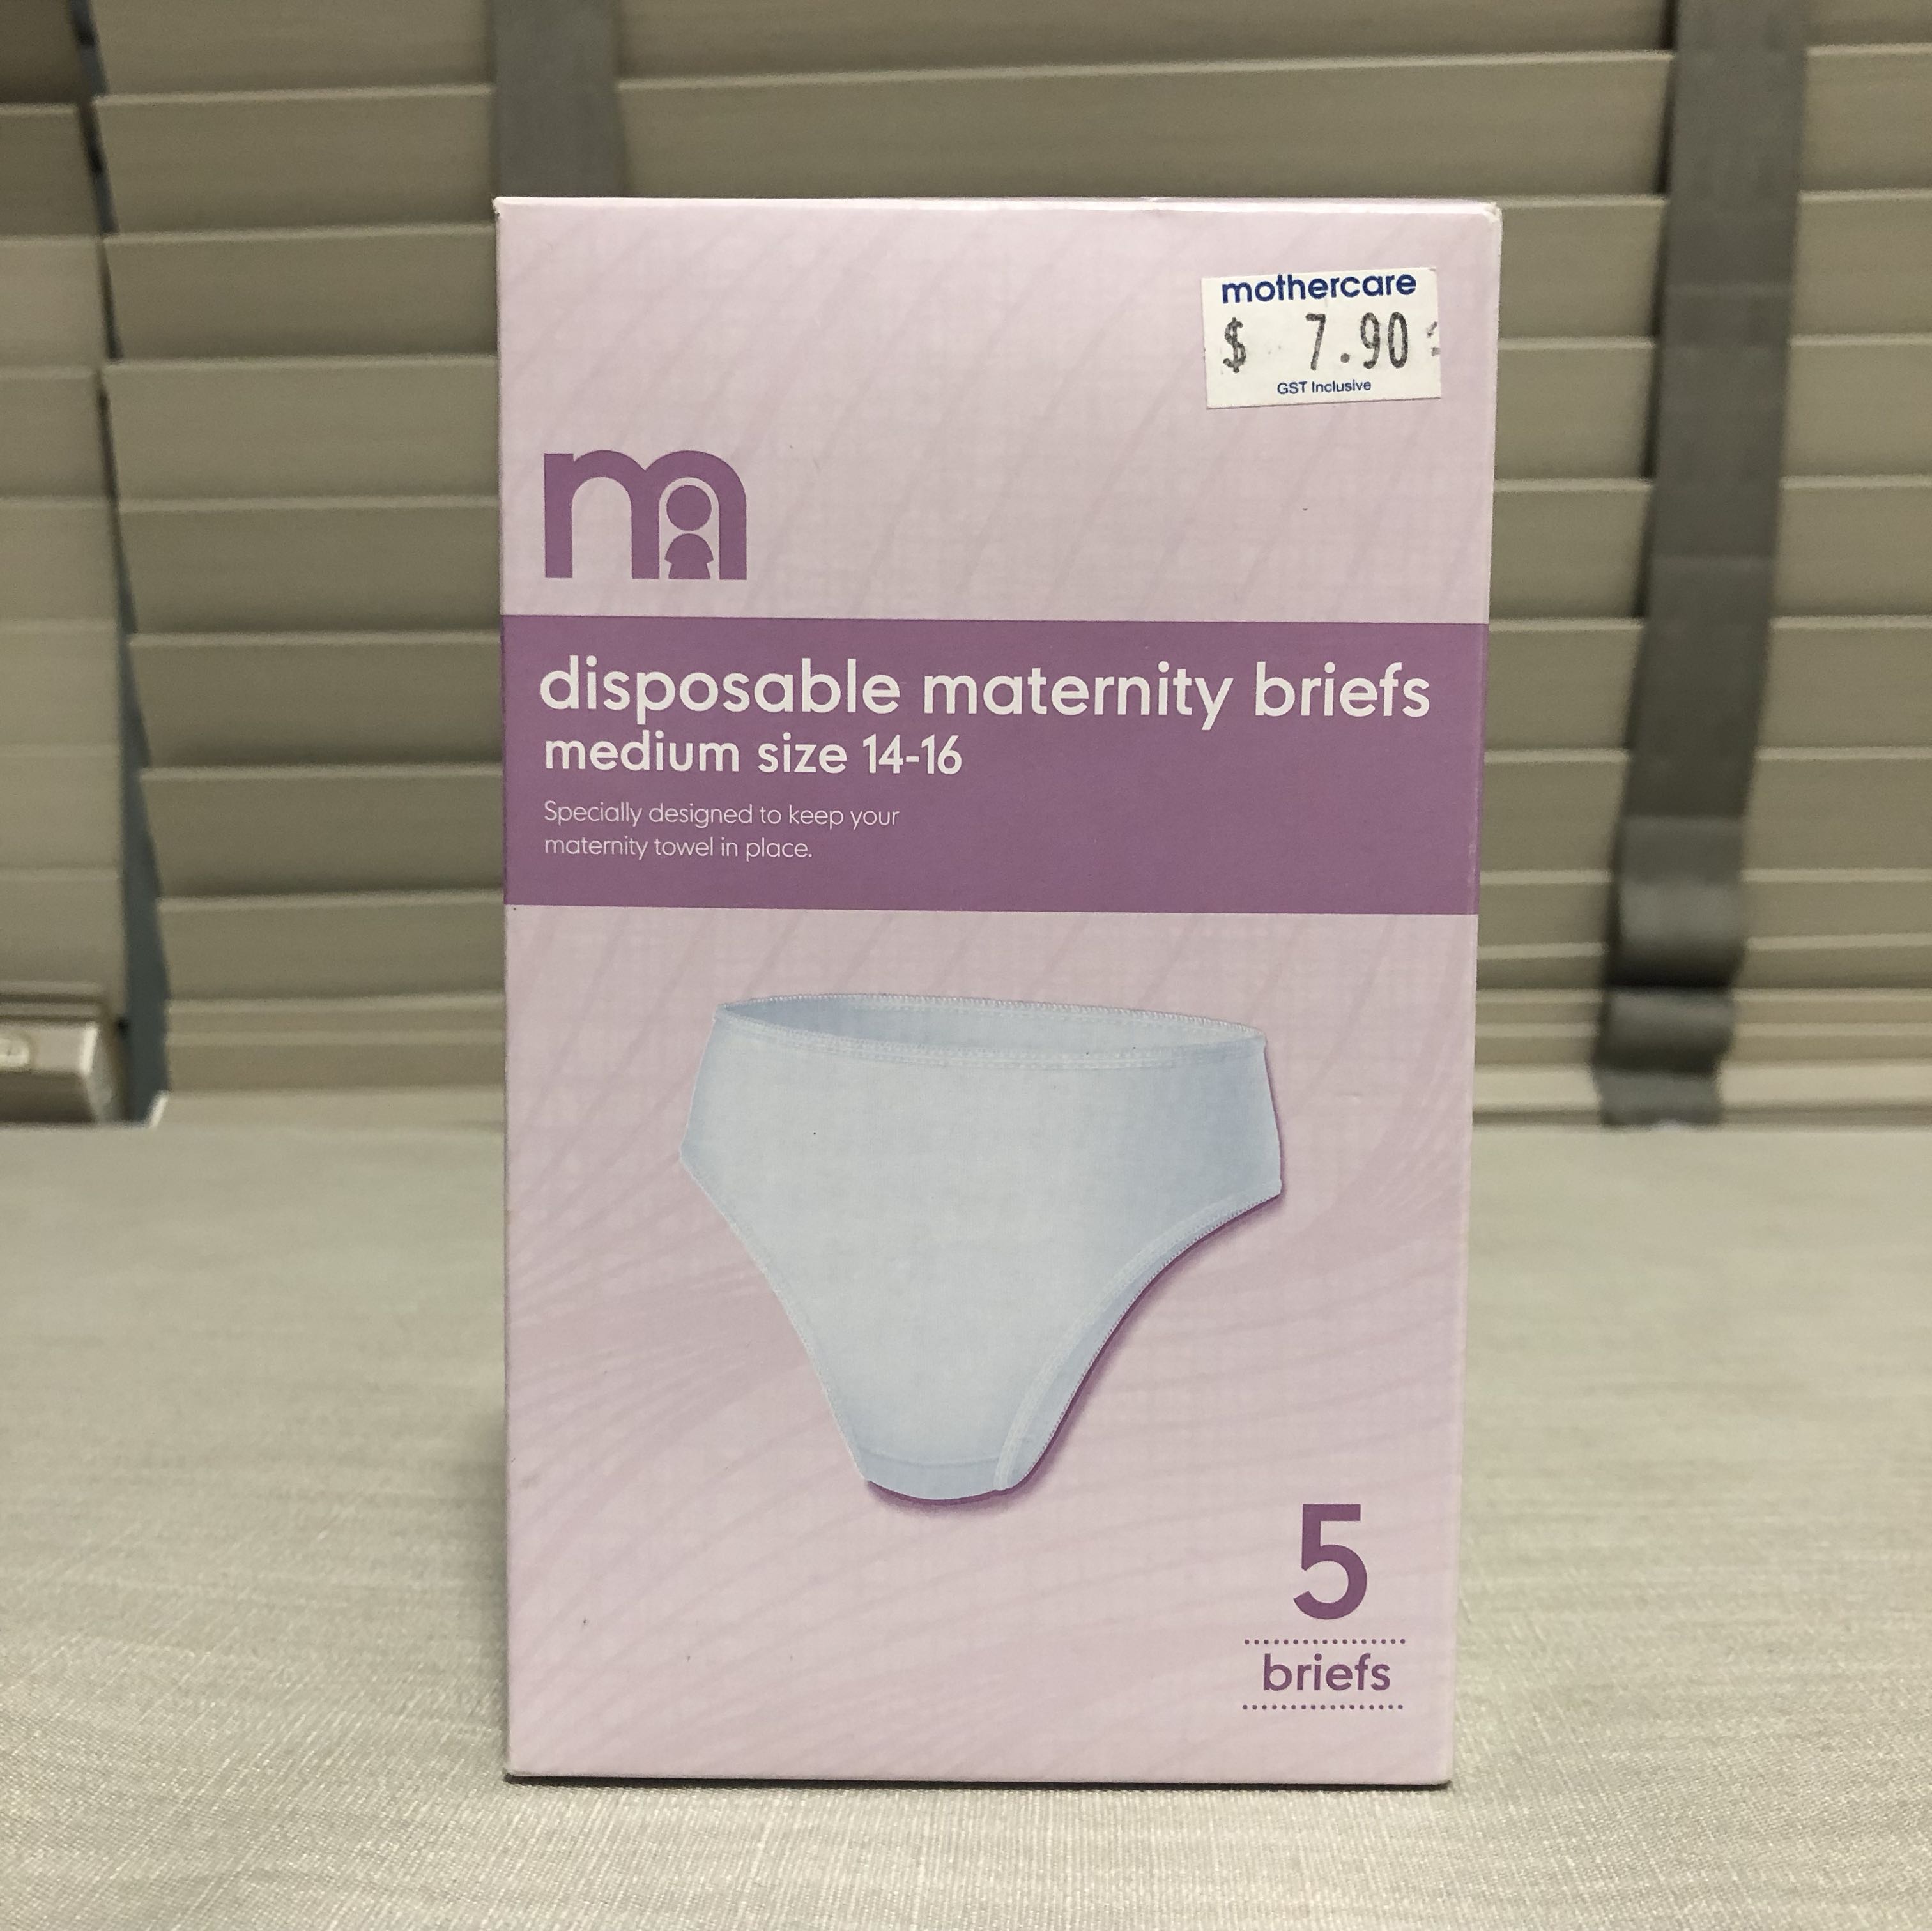 https://media.karousell.com/media/photos/products/2019/09/17/mothercare_disposable_maternity_briefs_underwear_size_m_1568727001_db693d54.jpg